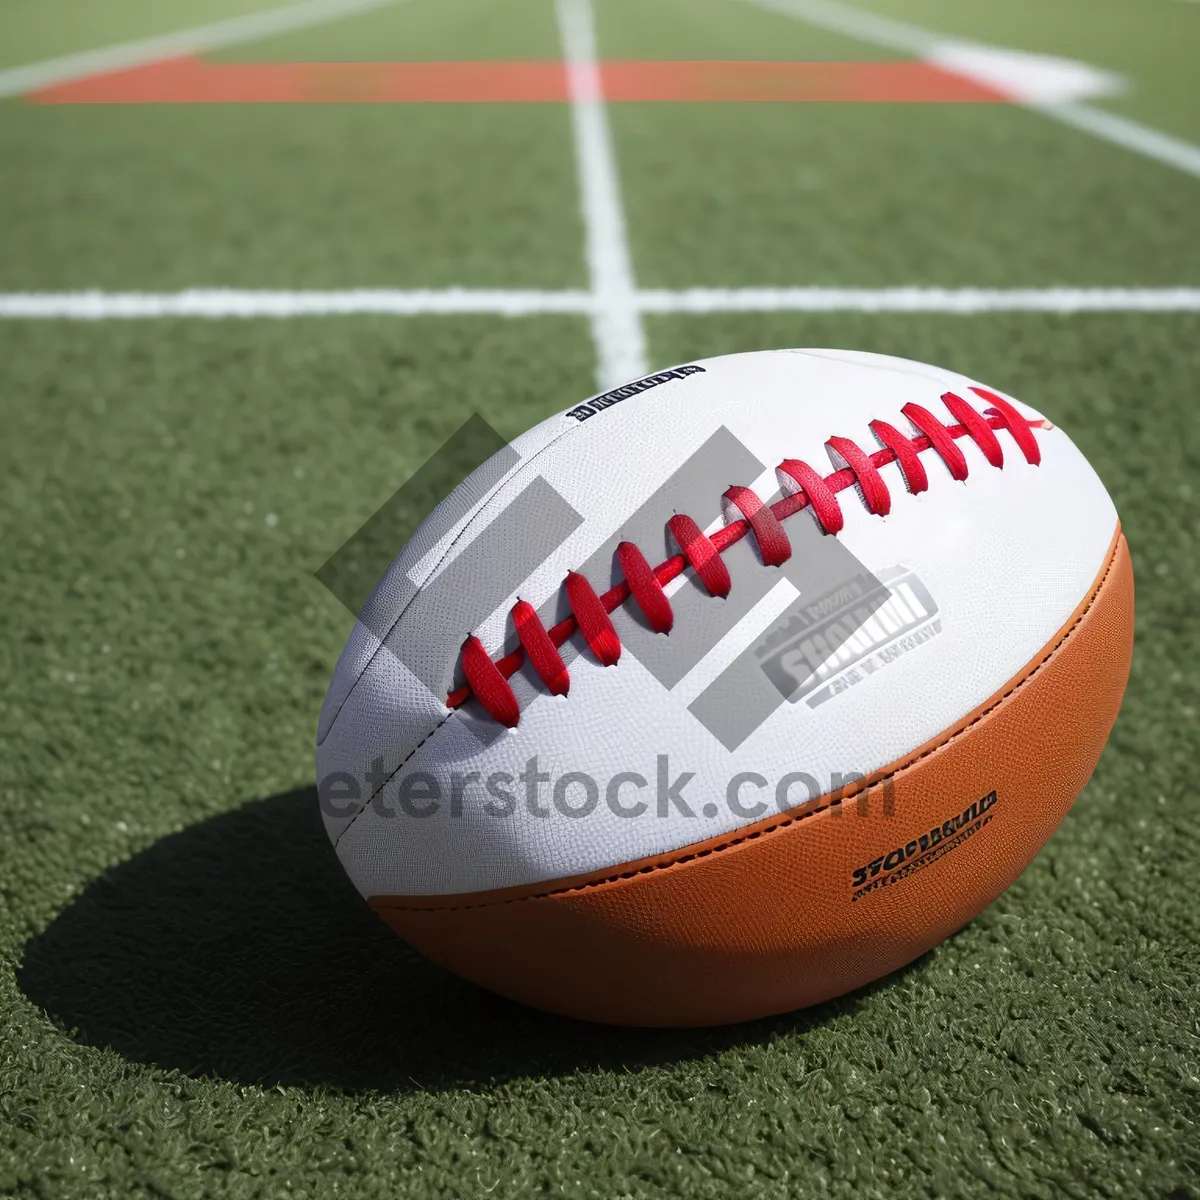 Picture of Rugby Ball on Grass: Sport Equipment for Game